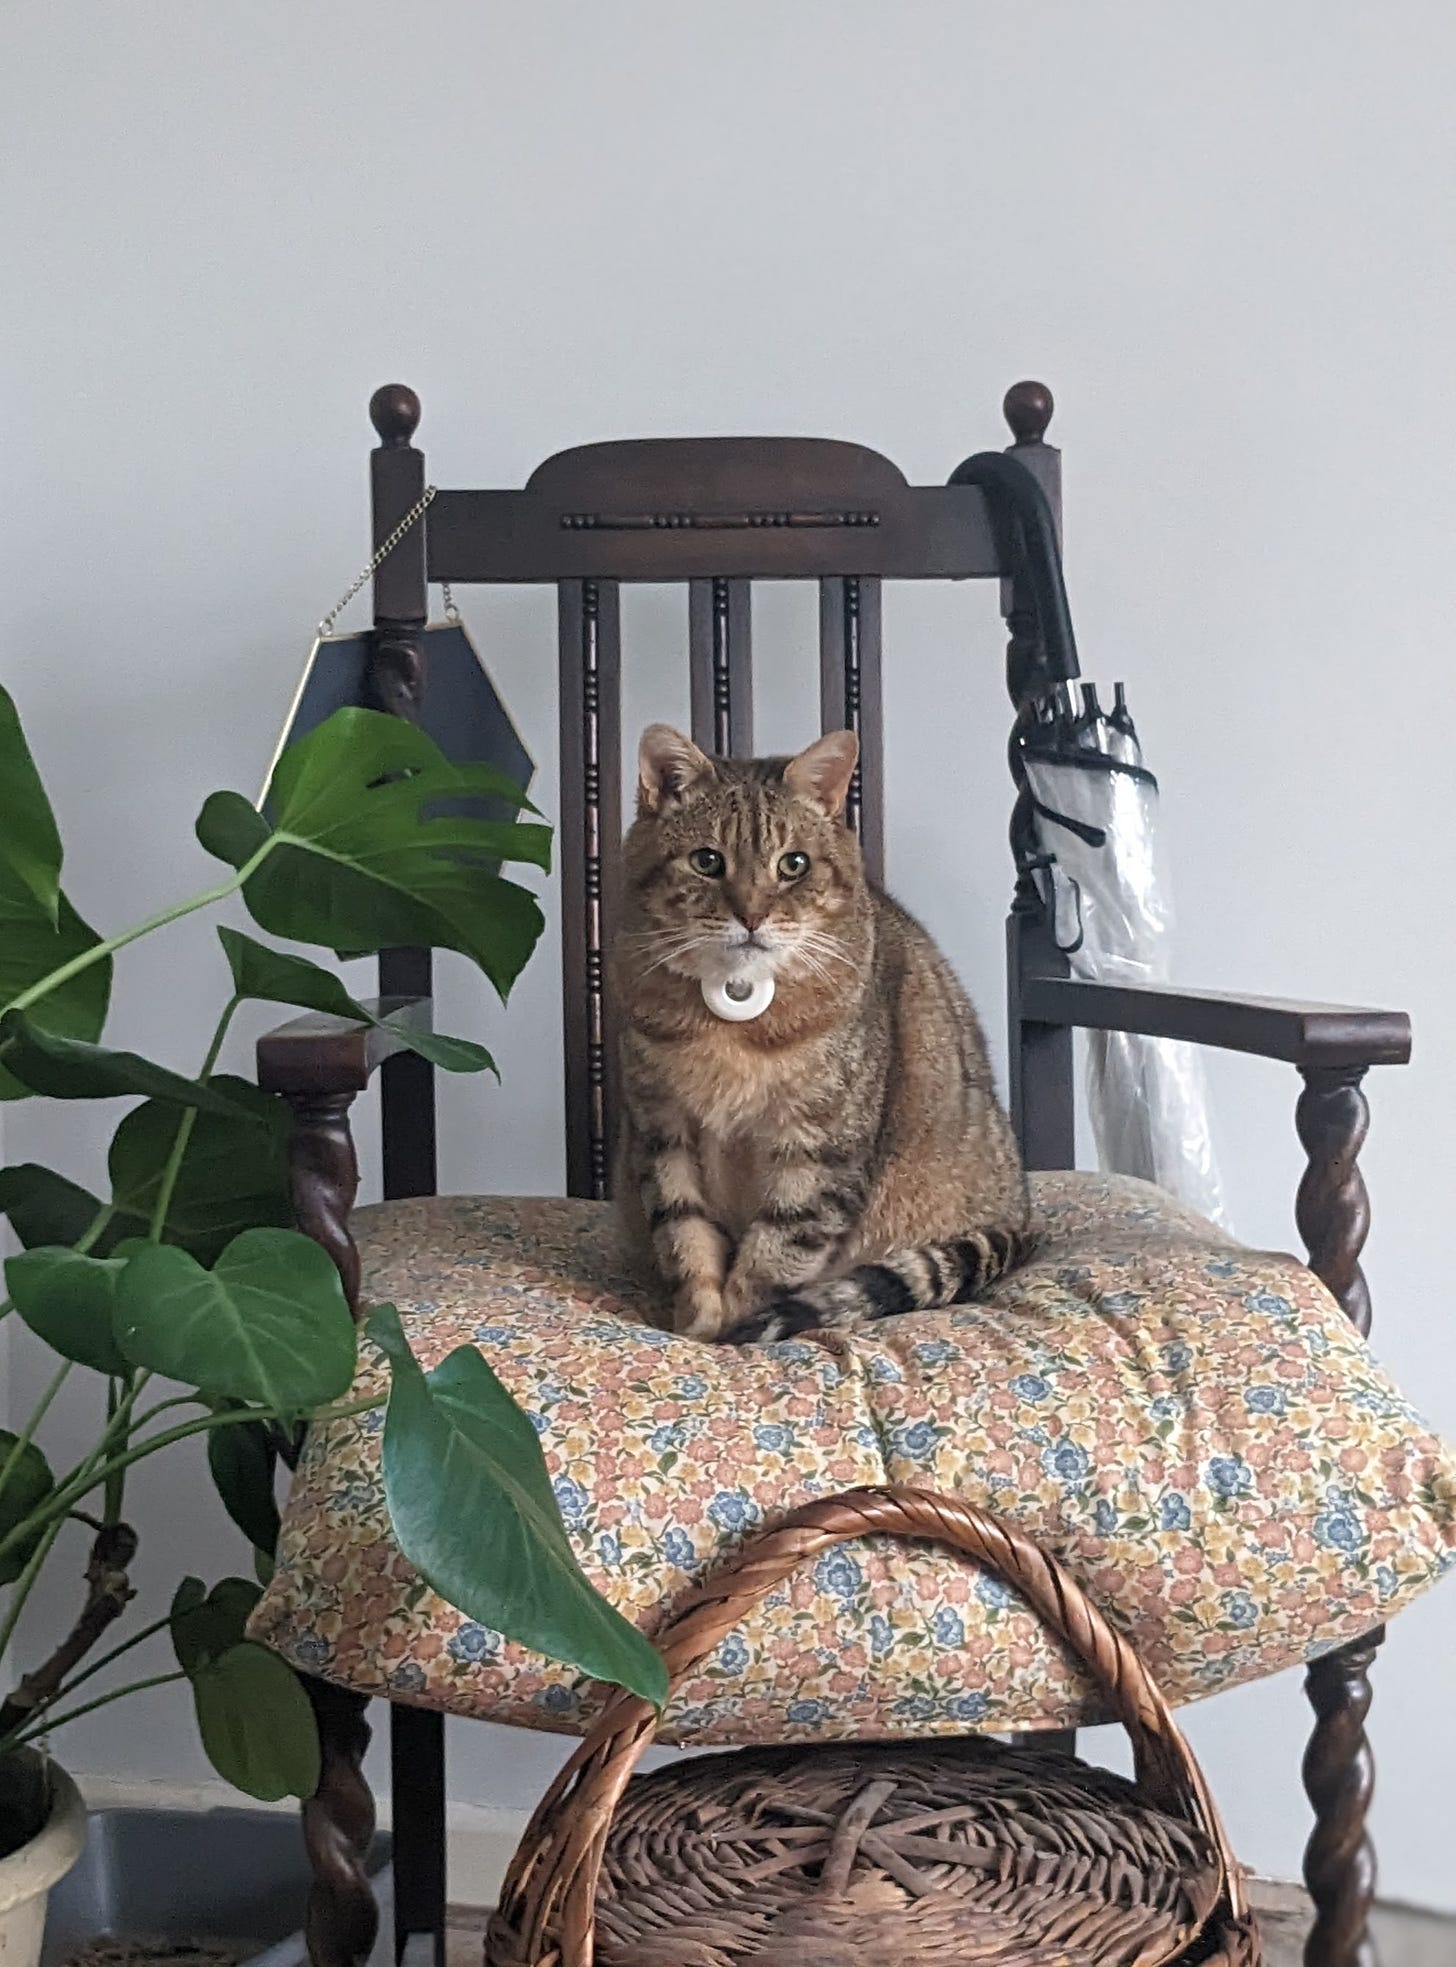 cat sat on throne style chair, with a monstera plant beside them 